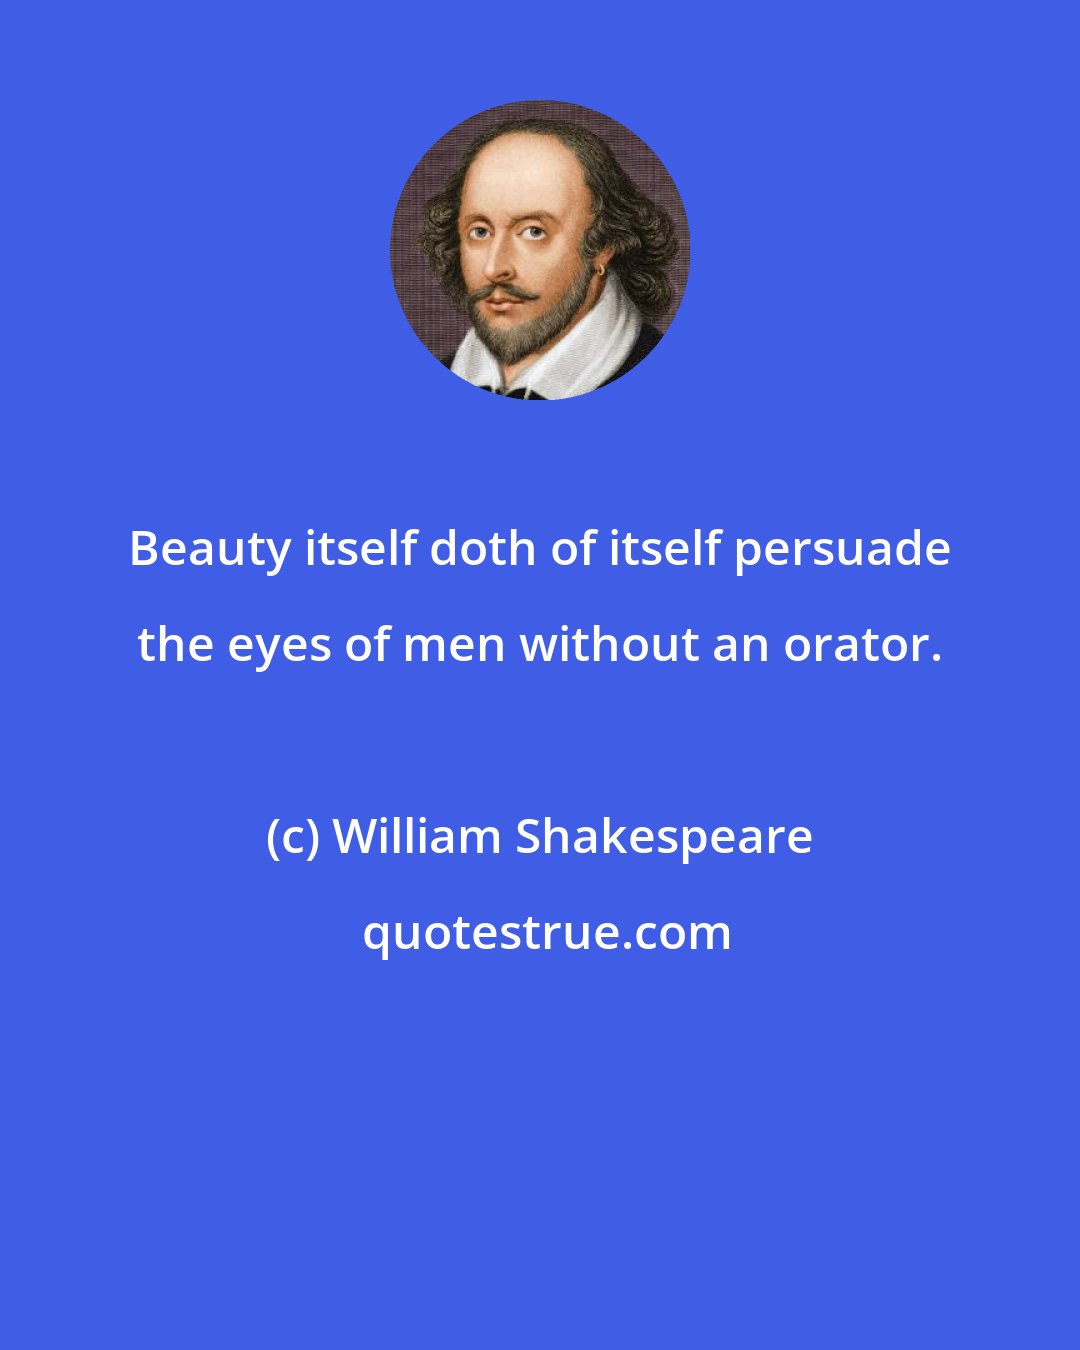 William Shakespeare: Beauty itself doth of itself persuade the eyes of men without an orator.